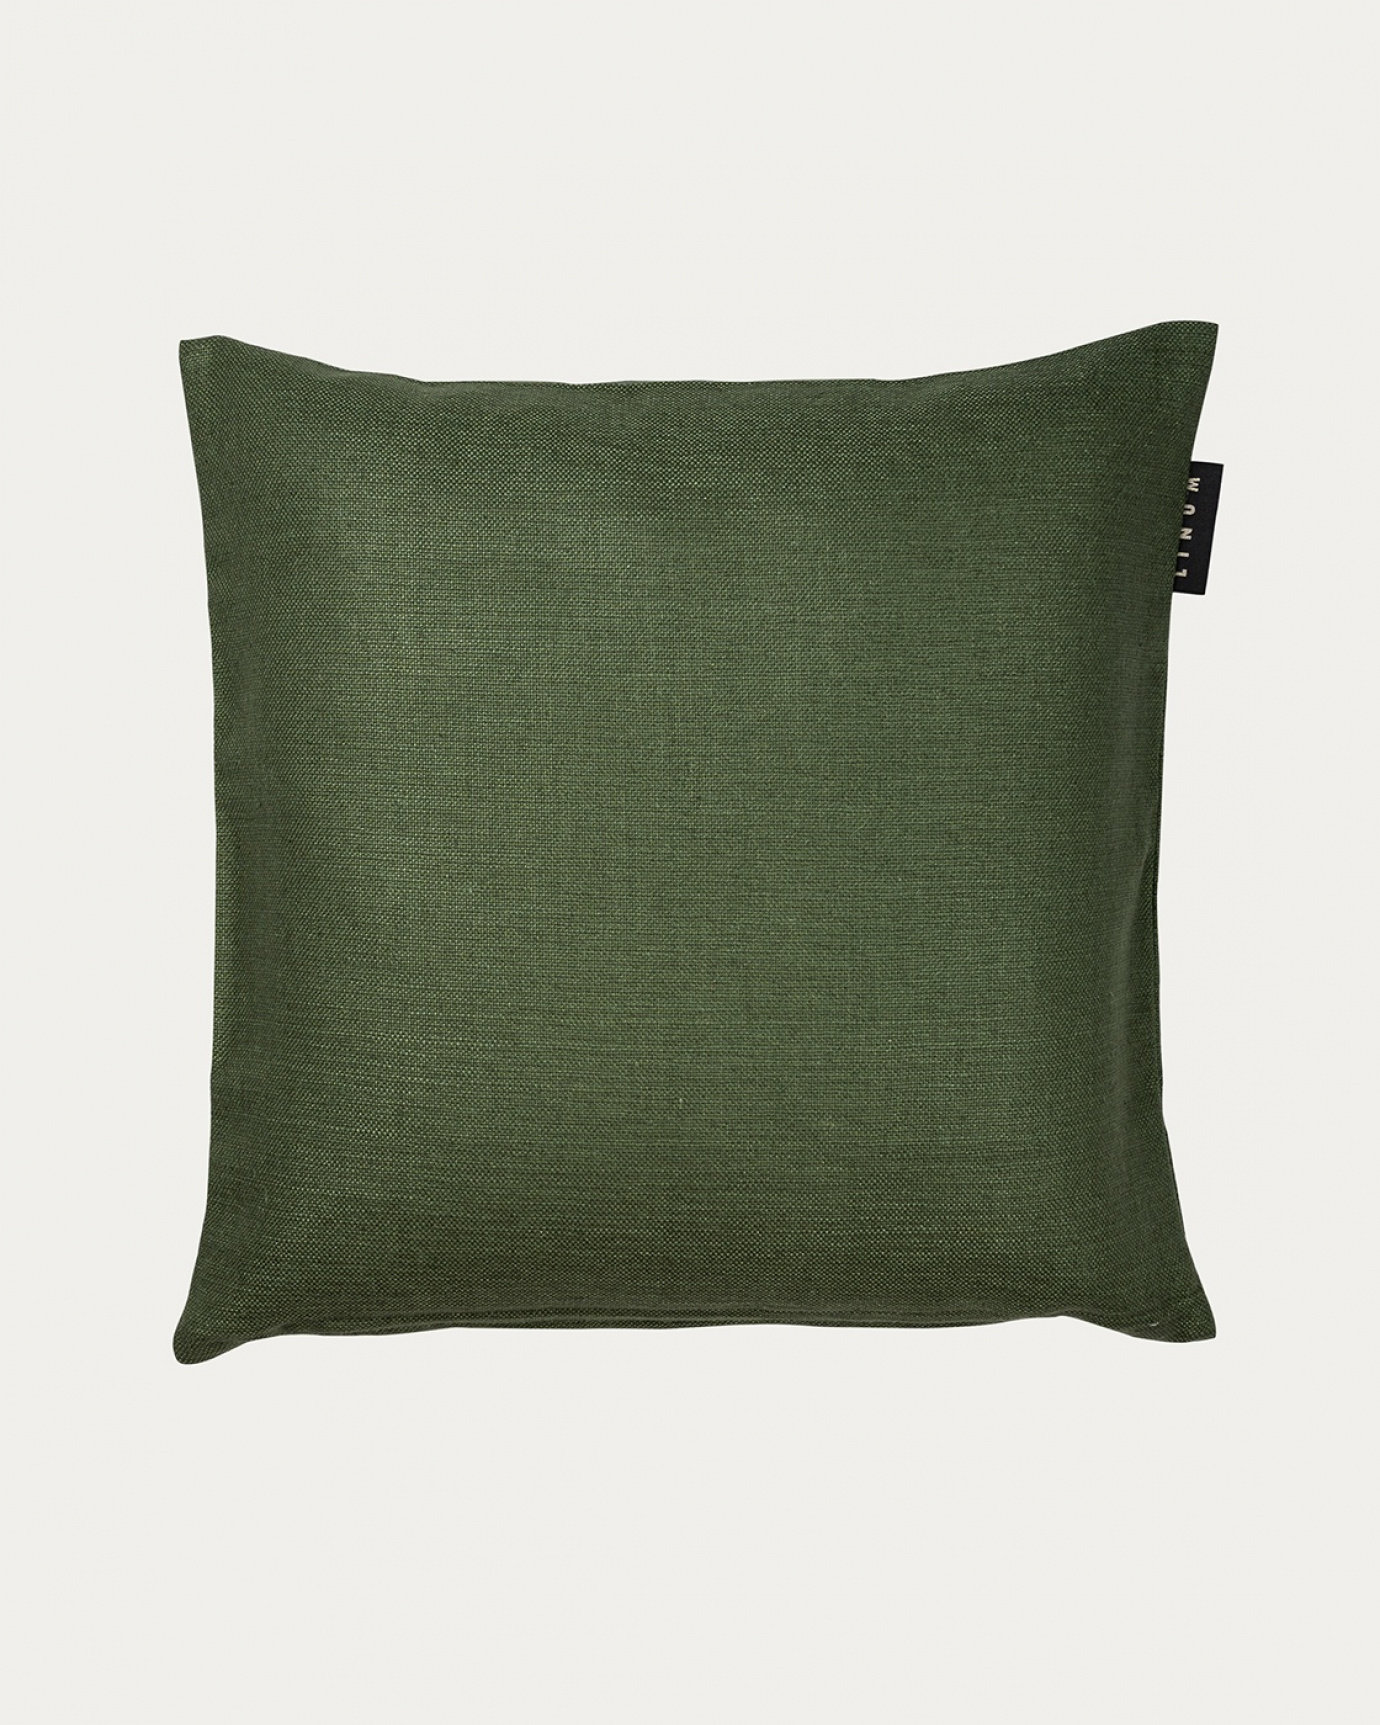 Product image dark olive green SETA cushion cover made of 100% raw silk that gives a nice lustre from LINUM DESIGN. Size 50x50 cm.